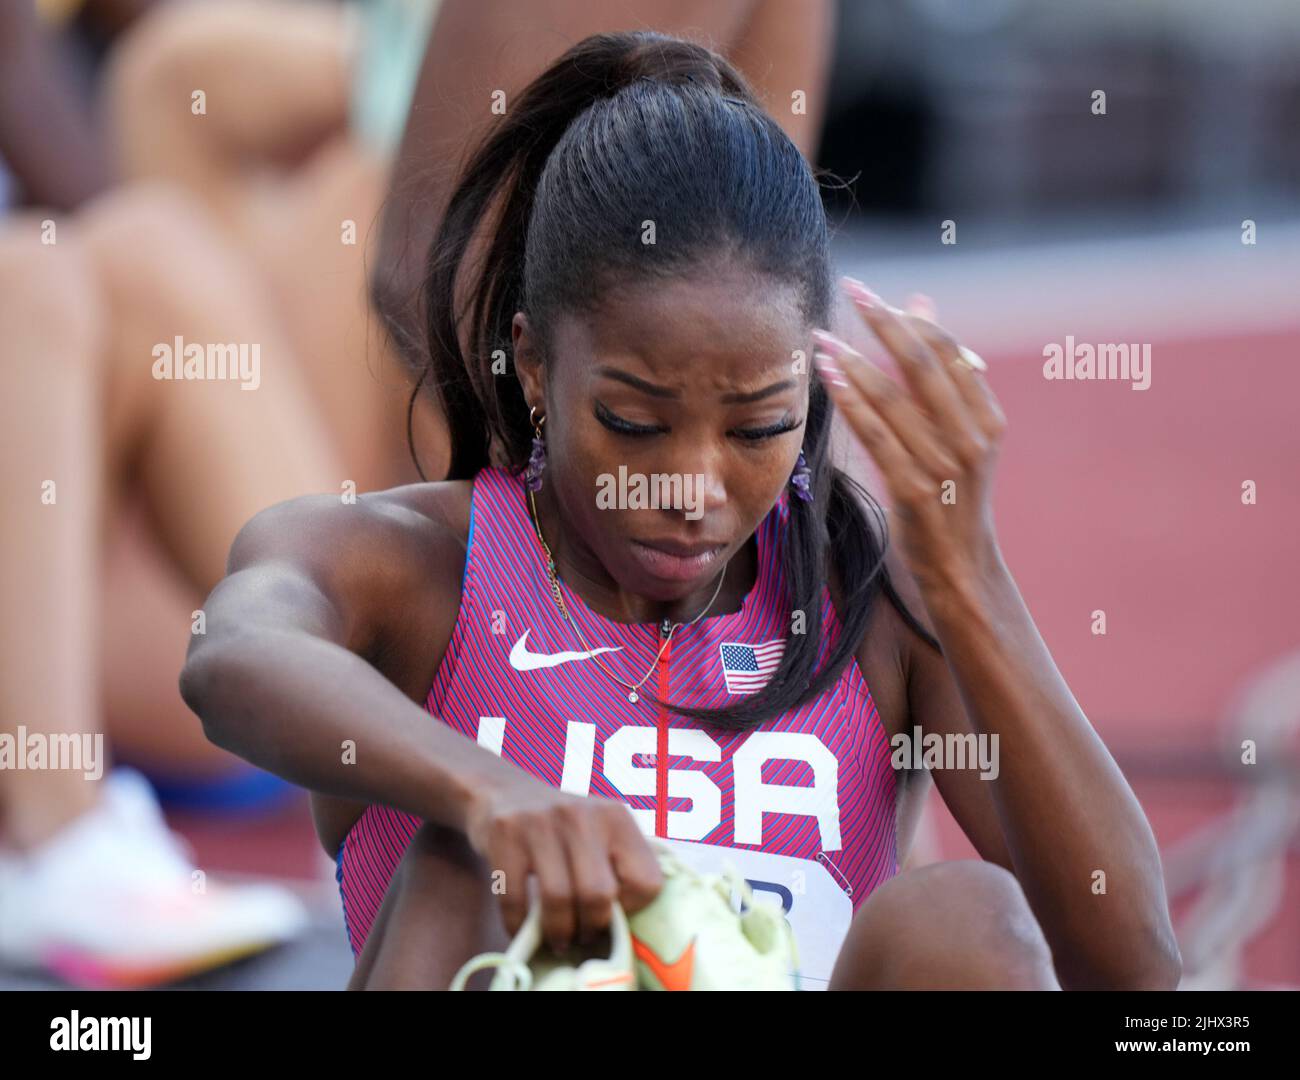 Eugene, USA. 20th July, 2022. Britton Wilson of the United States reacts after the women's 400m hurdles semifinal at the World Athletics Championships Oregon22 in Eugene, Oregon, the United States, July 20, 2022. Credit: Wang Ying/Xinhua/Alamy Live News Stock Photo